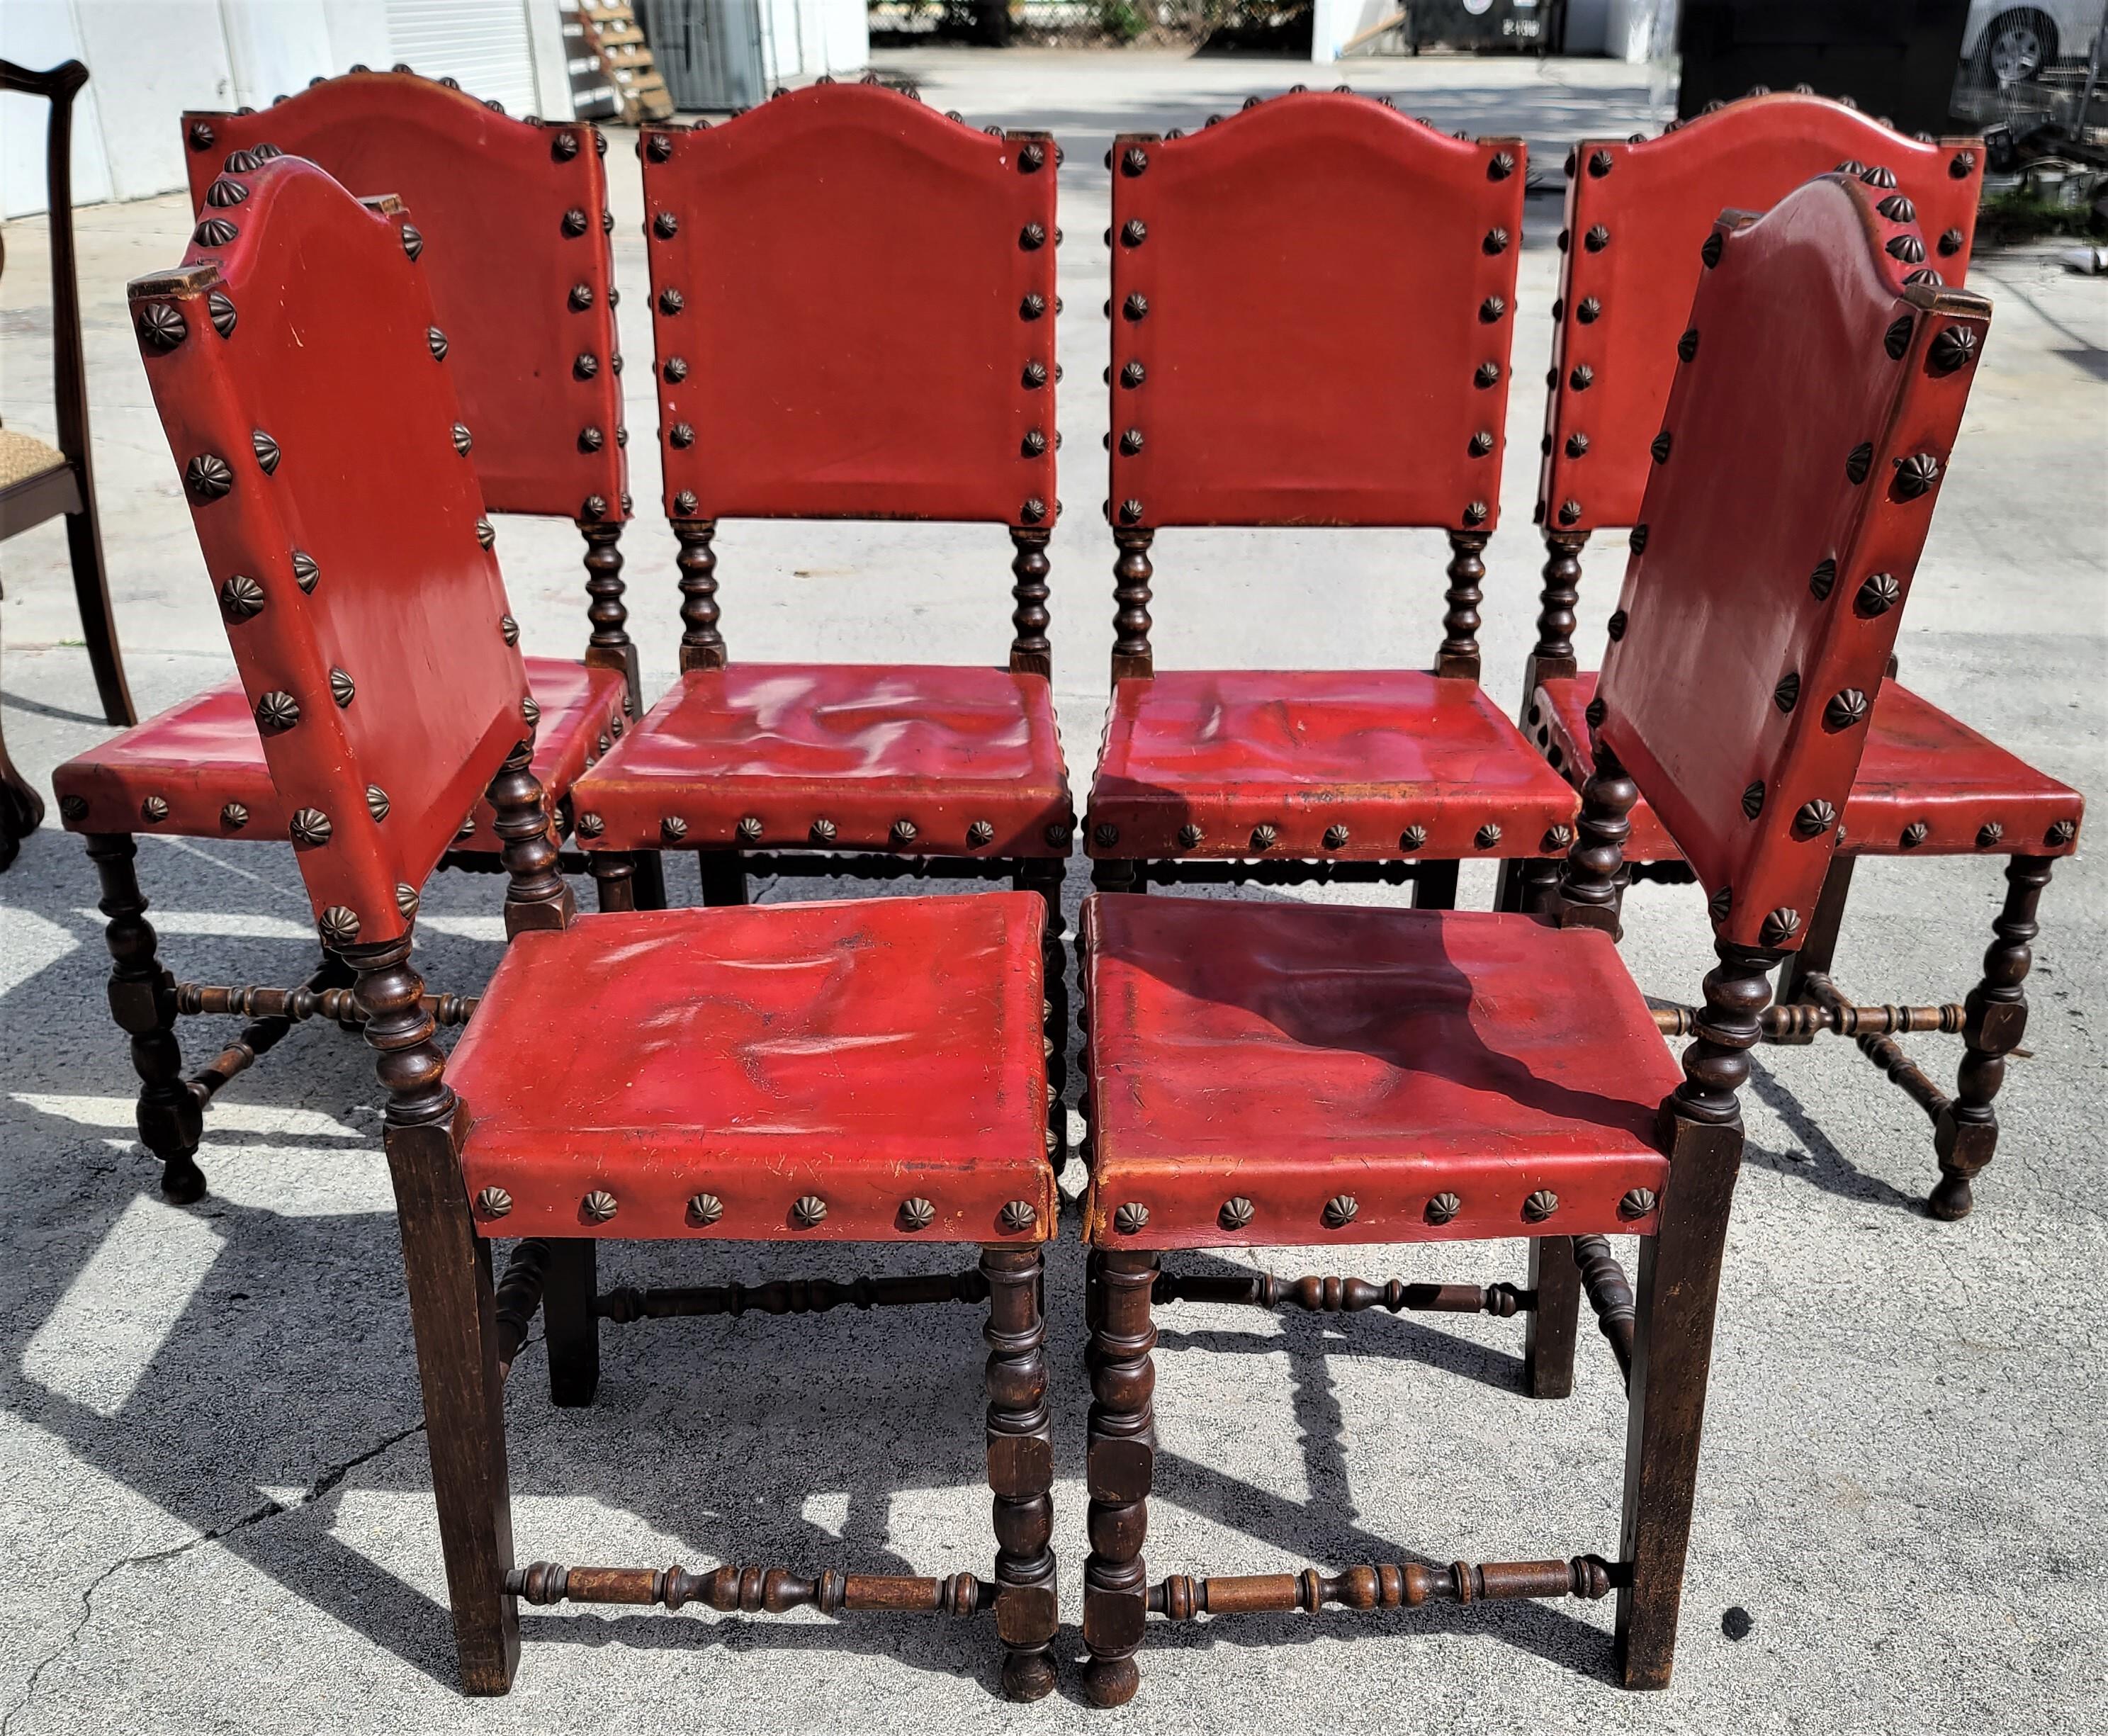 Offering one of our recent Palm Beach Estate fine furniture acquisitions of a
Set of 6 Spanish Renaissance Revival leather dining chairs 
Made in Spain

Approximate measurements in inches
41